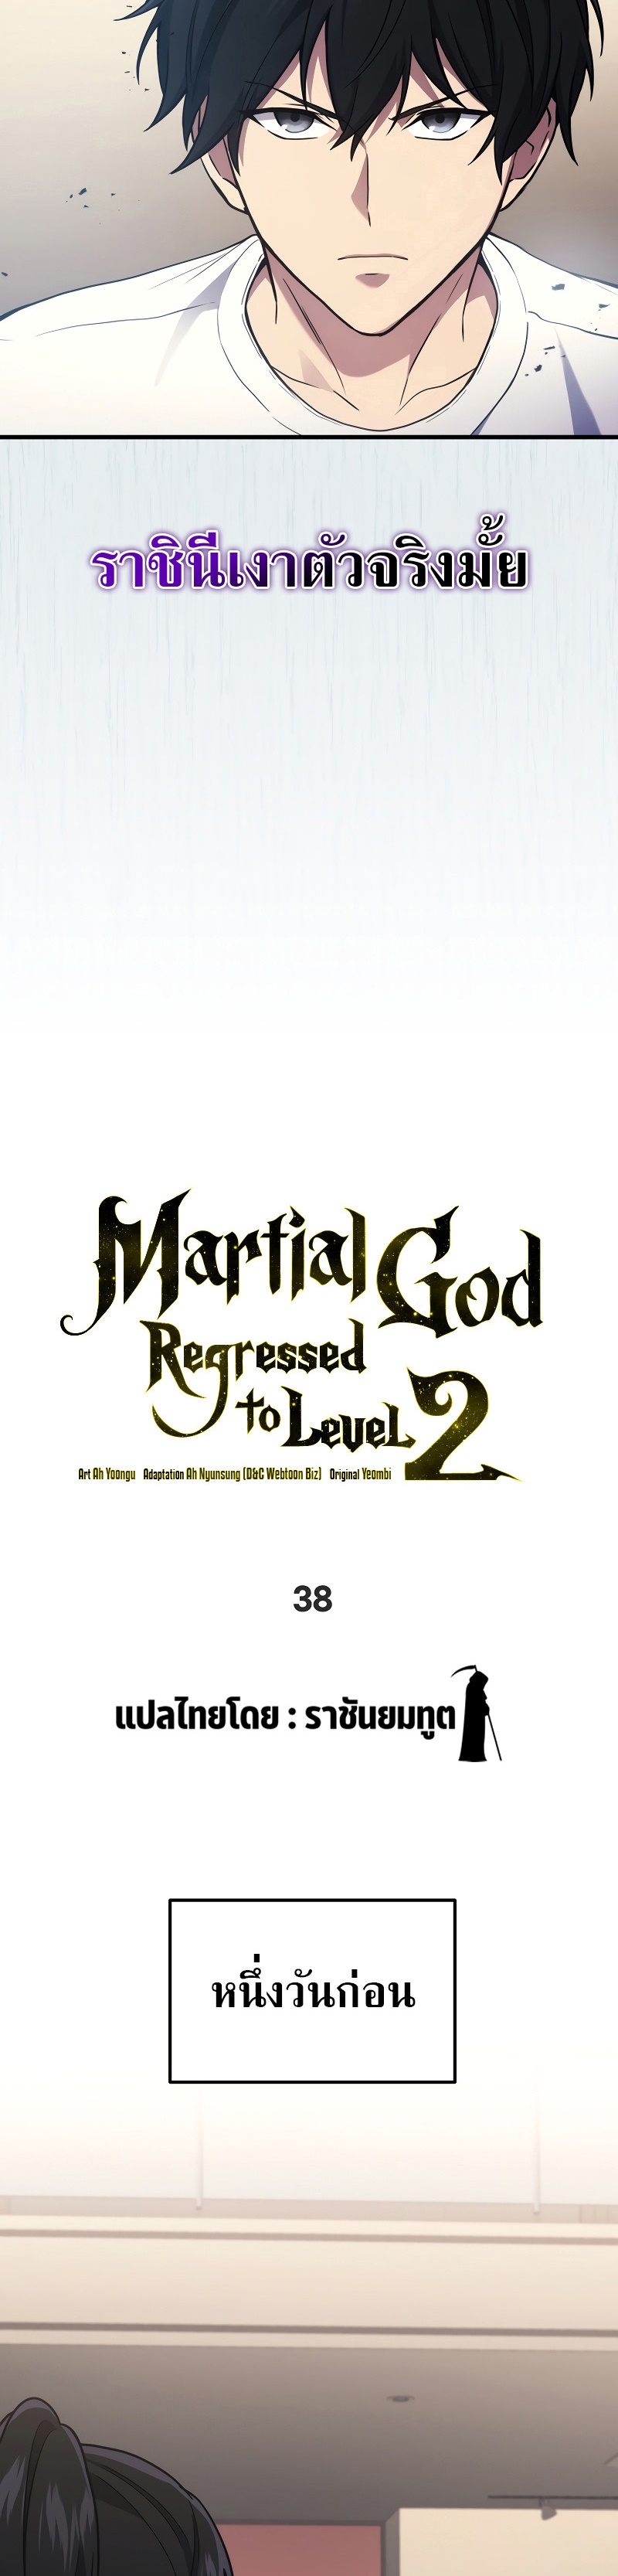 martial god regressed to level 2 38.06